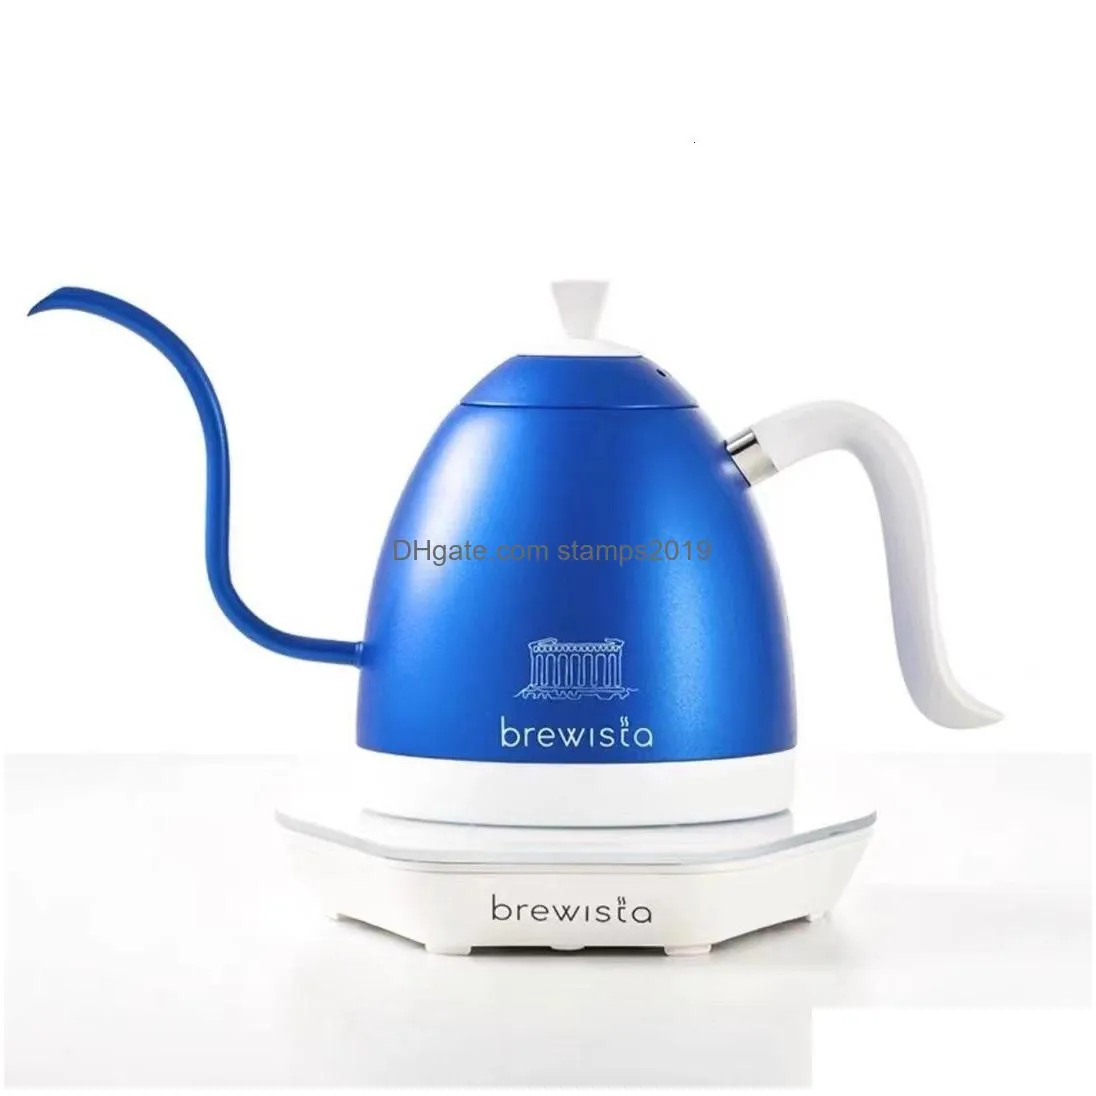 coffee pots brewista wooden handle thermostatic kettle tea gooseneck electric stainless steel coffee 600ml 1 0l 230721